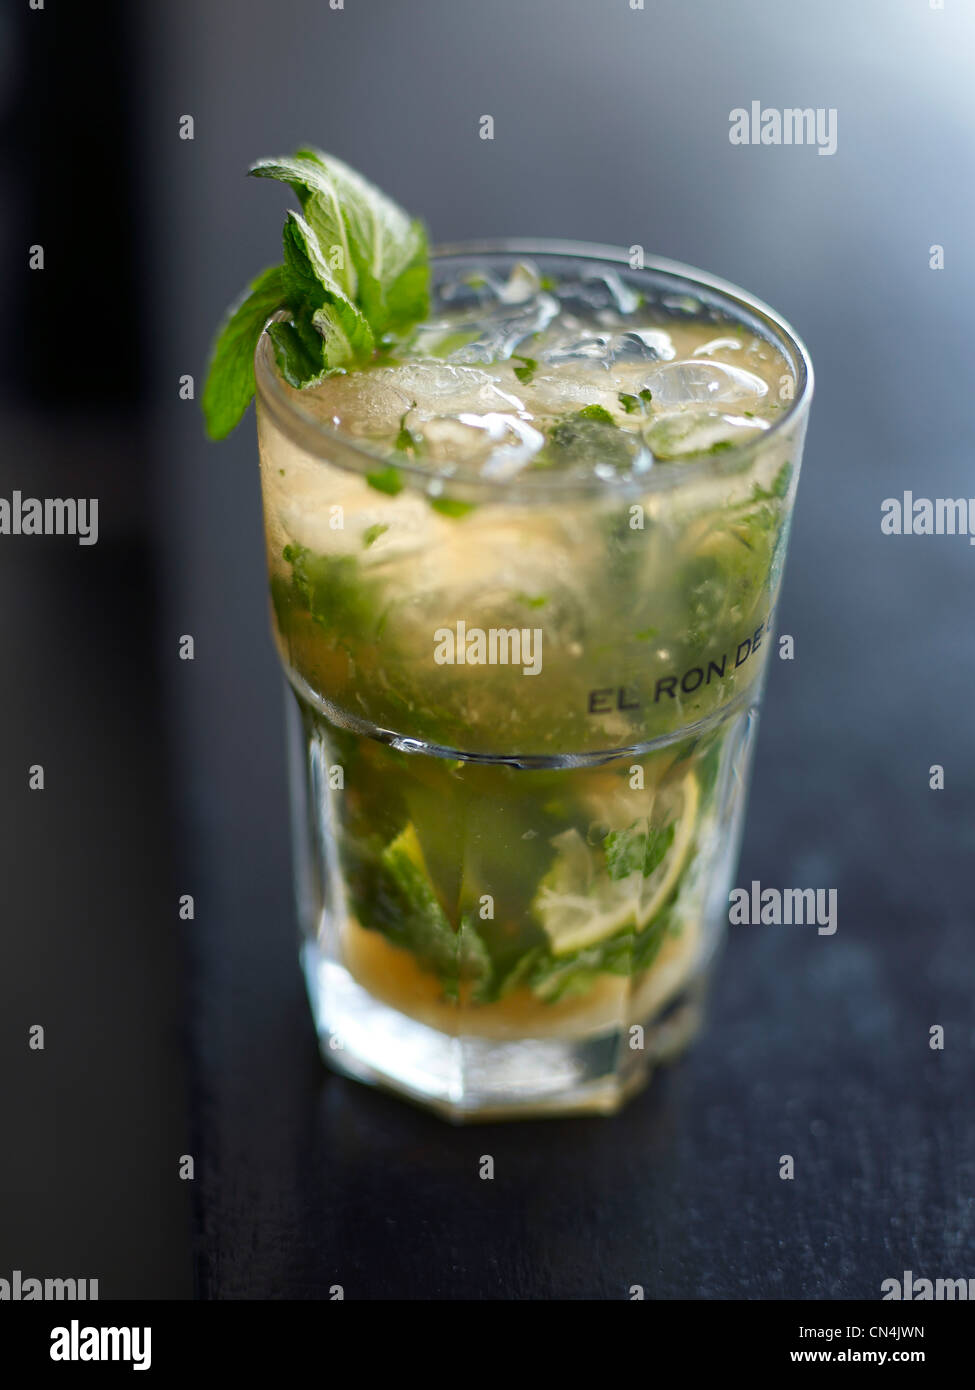 France, Pyrenees Atlantiques, Bidart, feature: Arnaud Daguin's coverage of the Basque country, mojito from the Blue Cargo Stock Photo